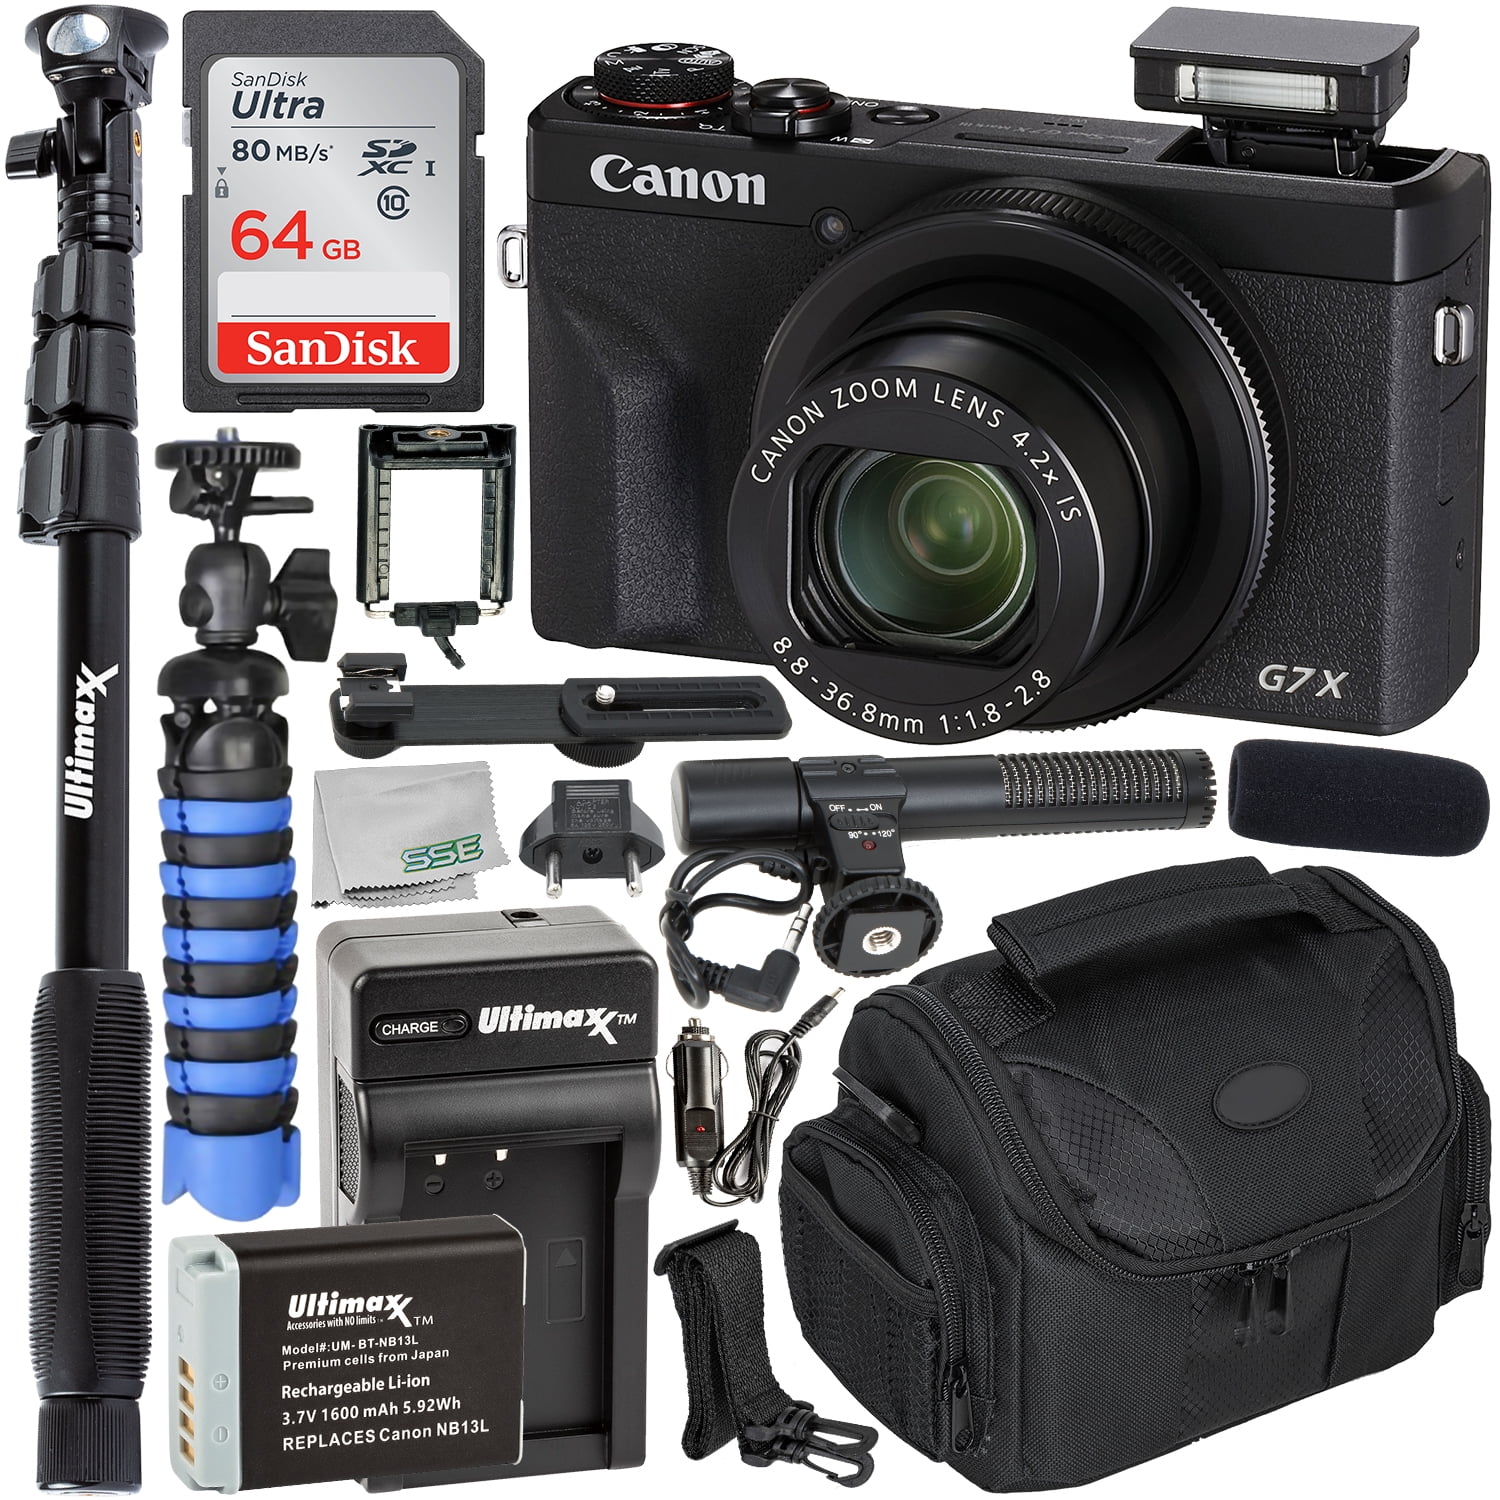  Canon PowerShot G7 X Mark II Digital Camera 20.1MP with 4.2X  Optical Zoom Full-HD Point and Shoot Kit Bundled with Complete Accessory  Bundle + 64GB + Monopod & More 